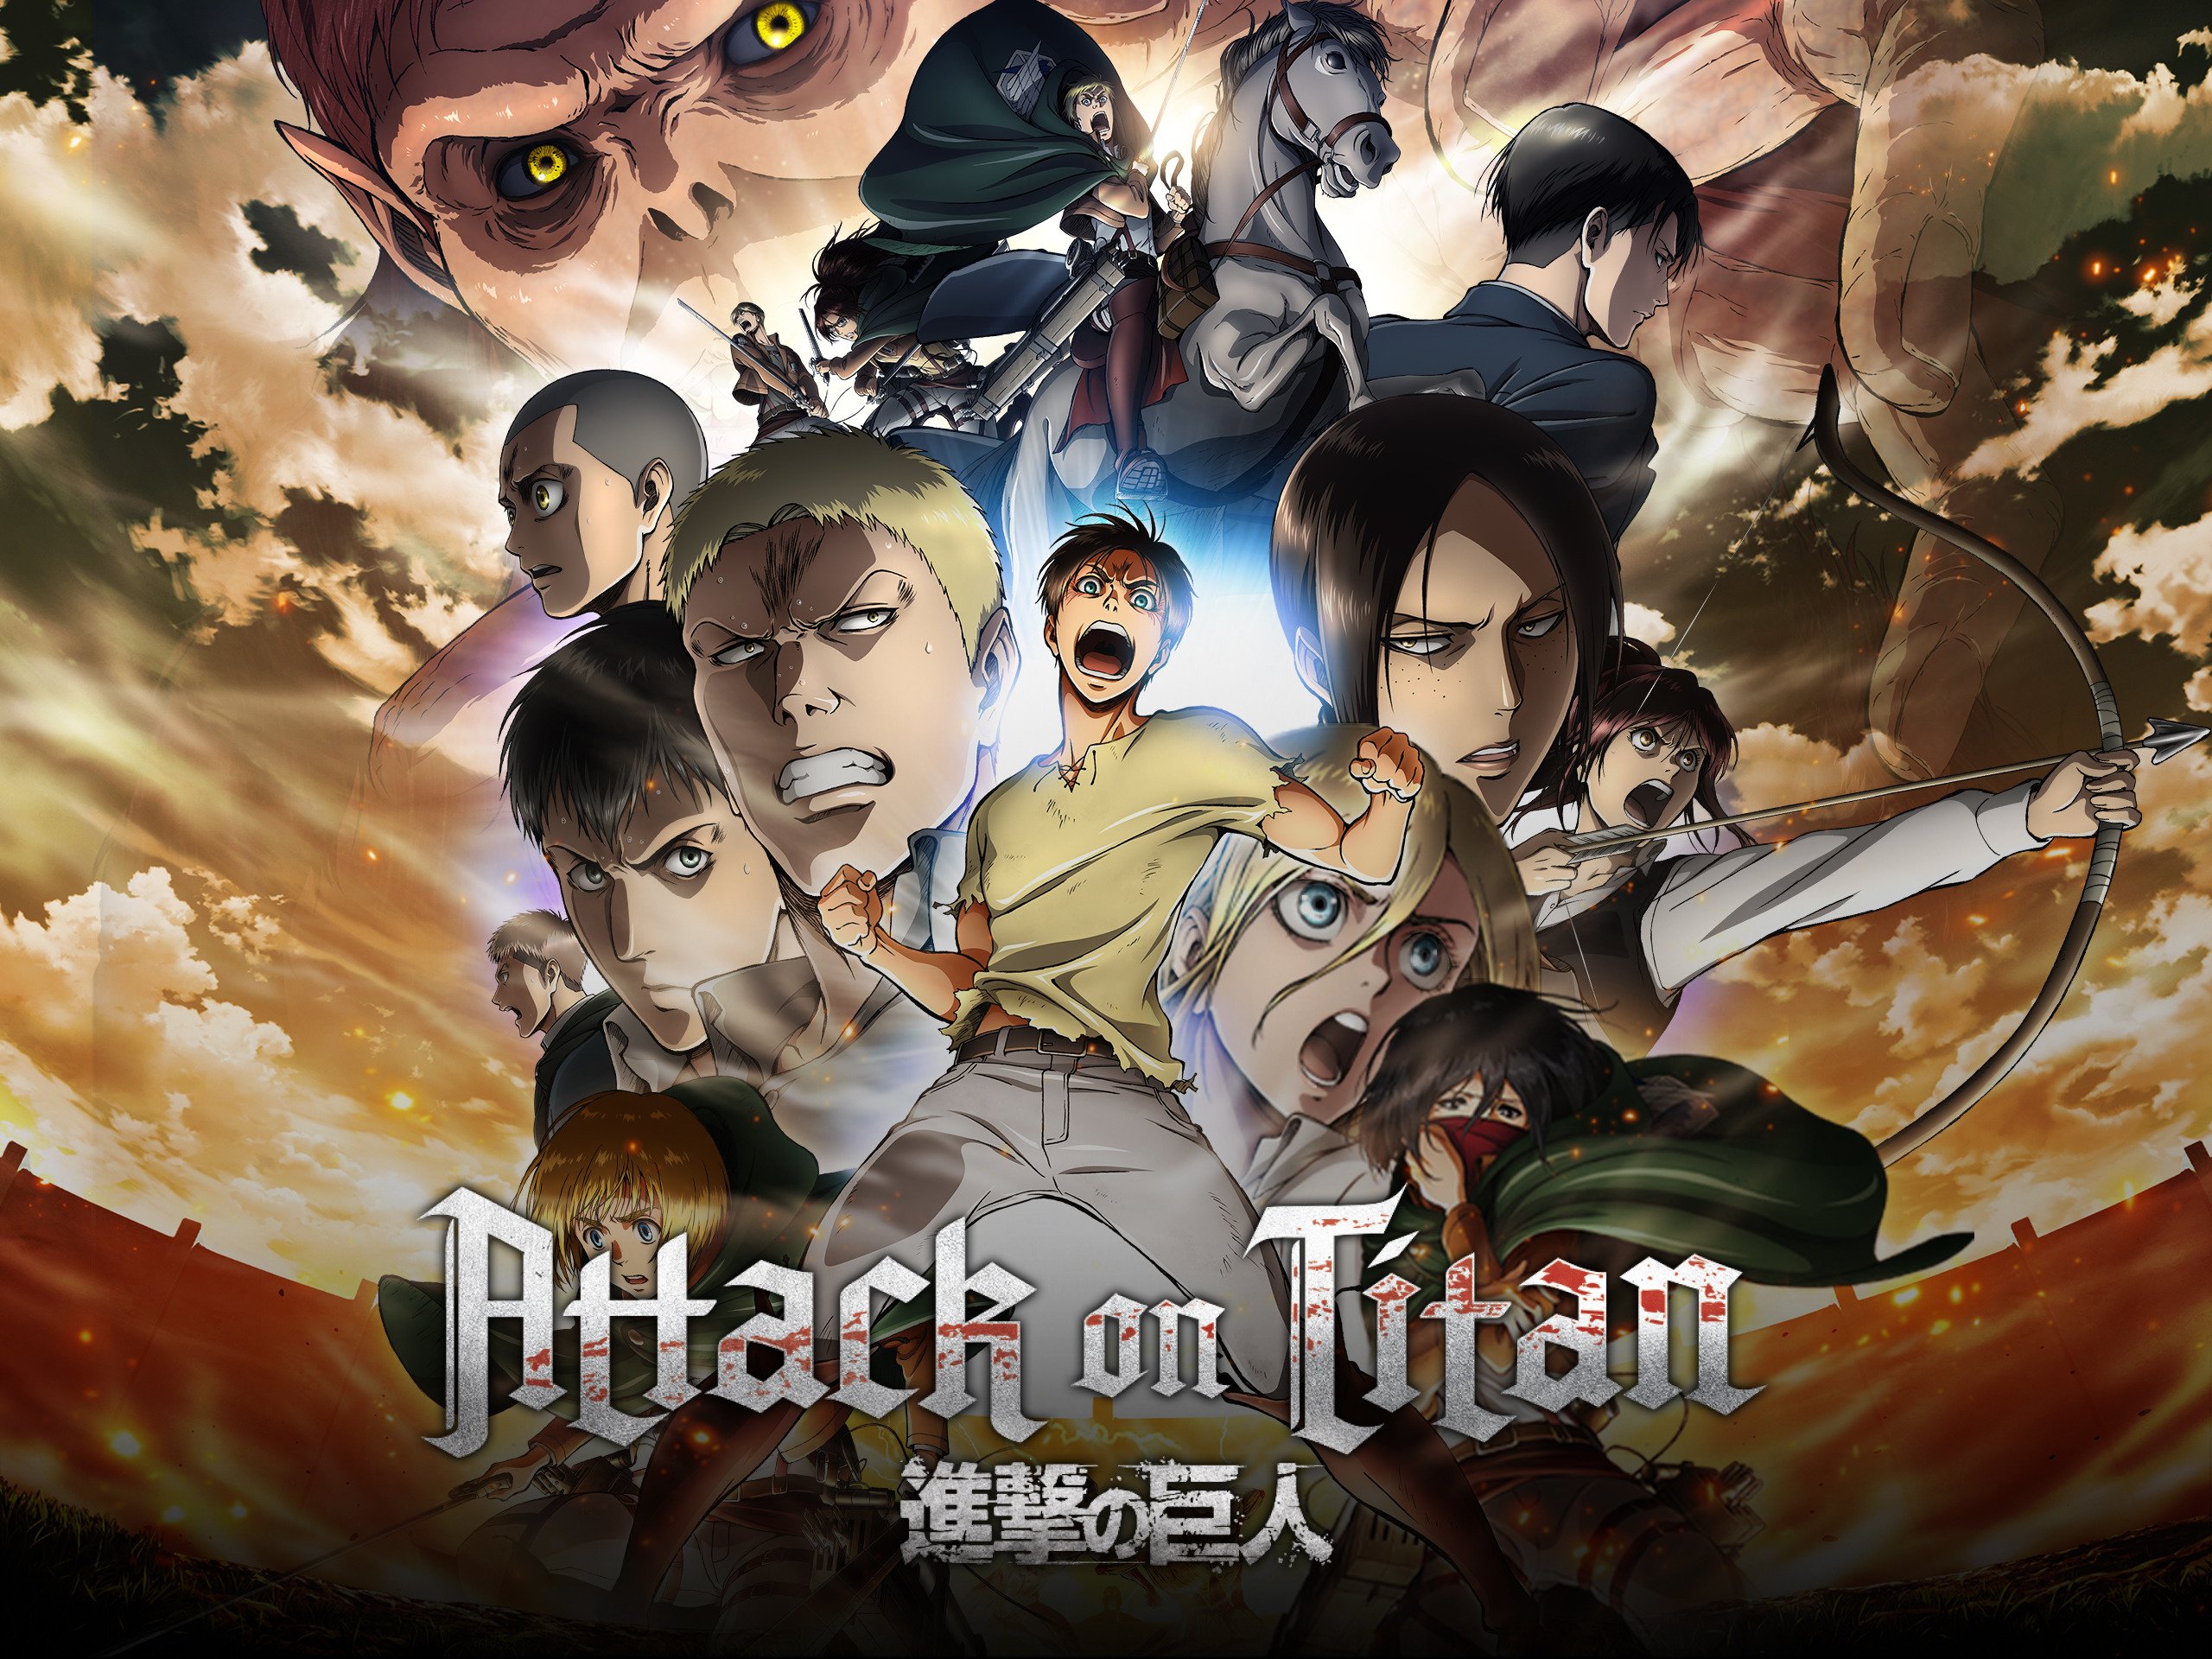 Attack On Titan' Isn't Just A Great TV Show – It's The Perfect Introduction  To Anime For A Newbie